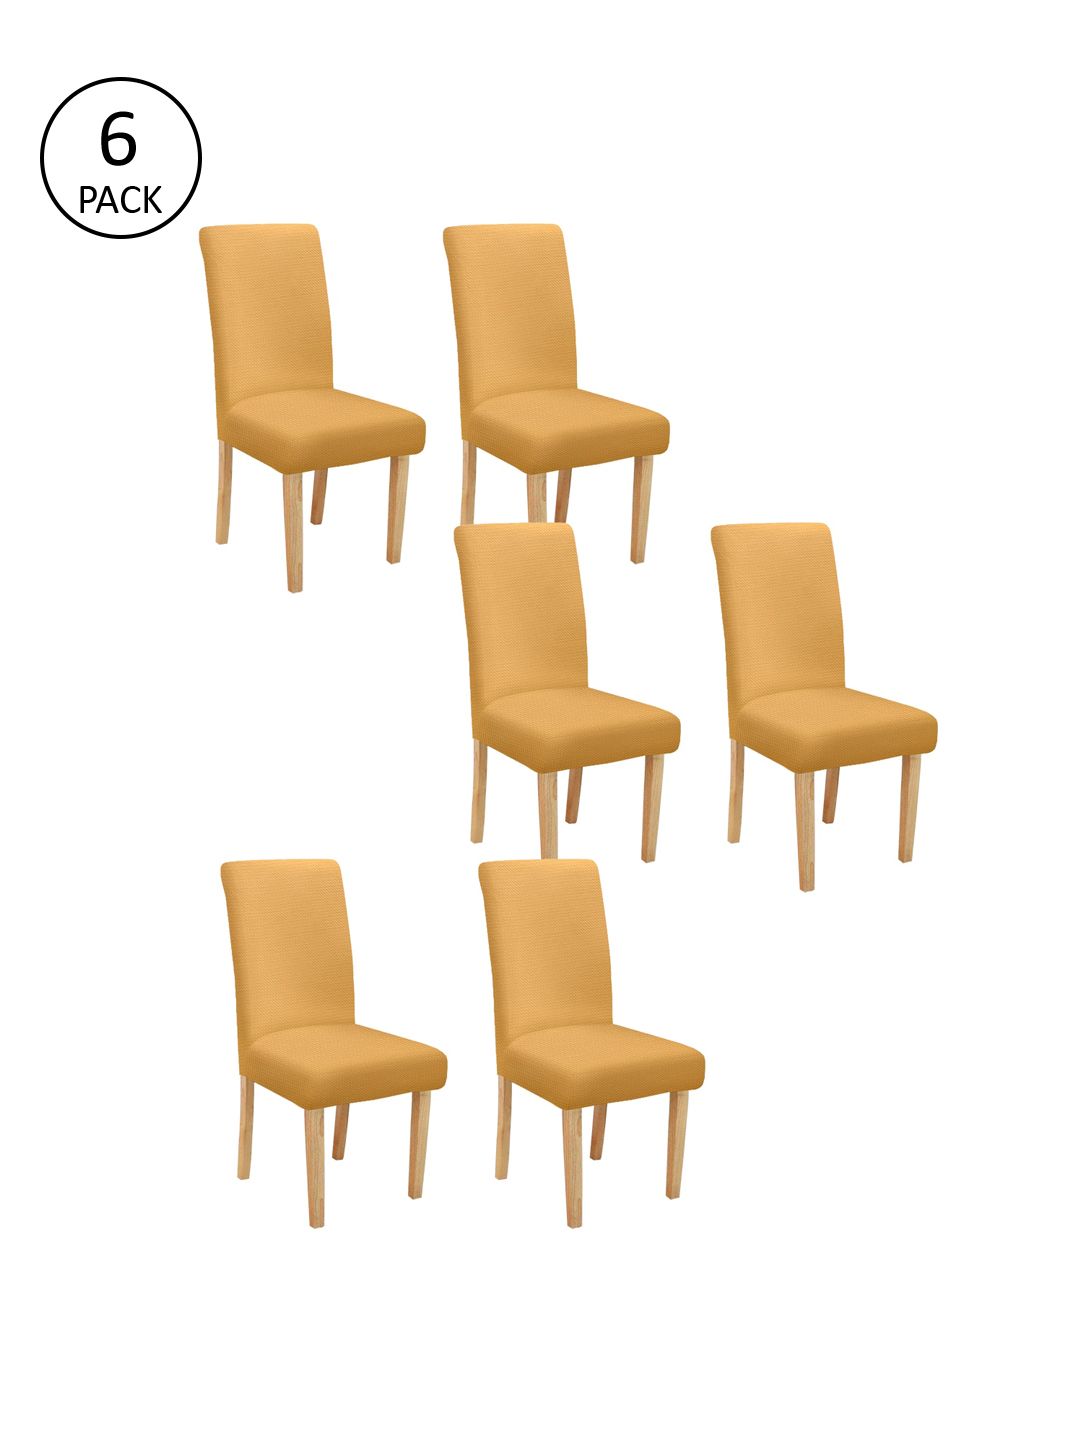 Cortina Set Of 6 Yellow Self Design Chair Covers Price in India